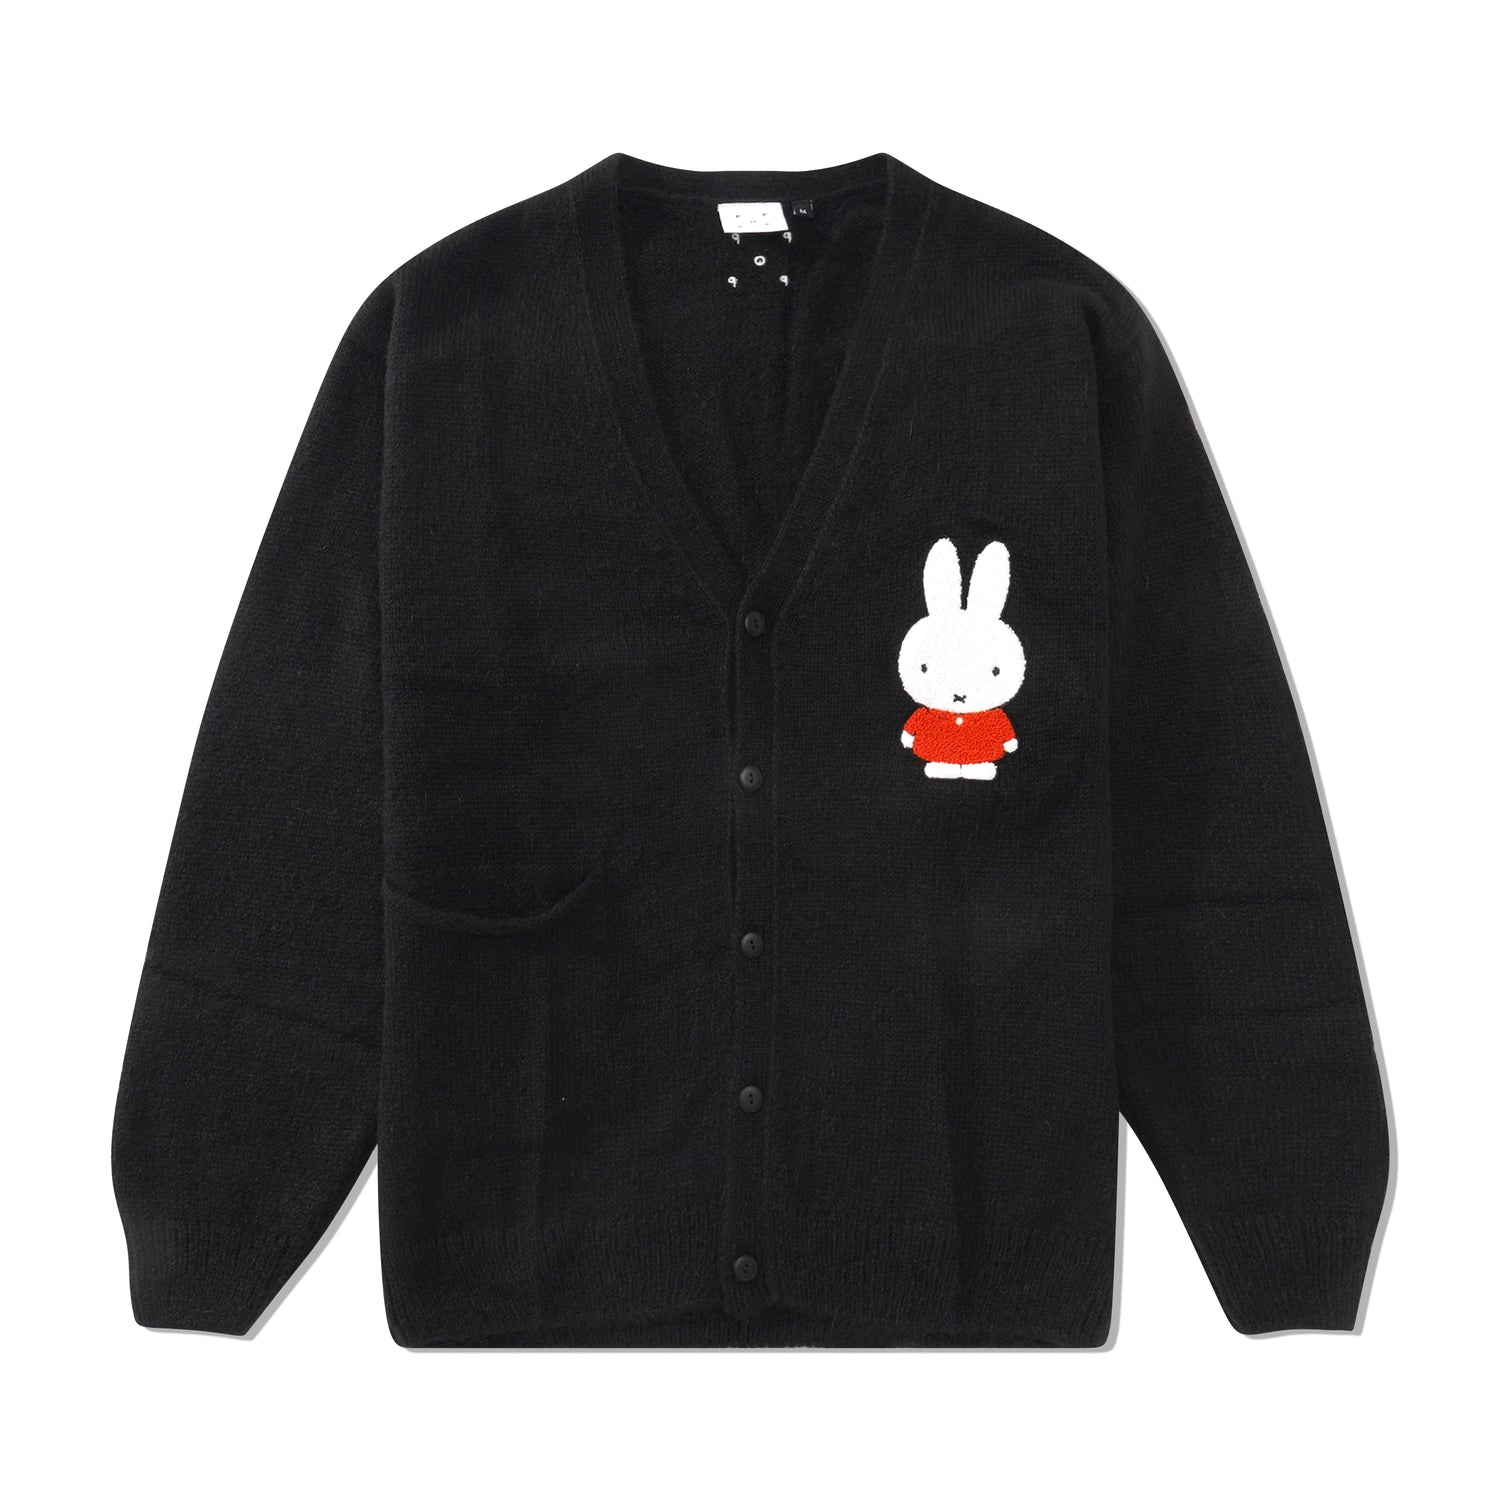 Miffy Applique Knitted Cardigan, Black